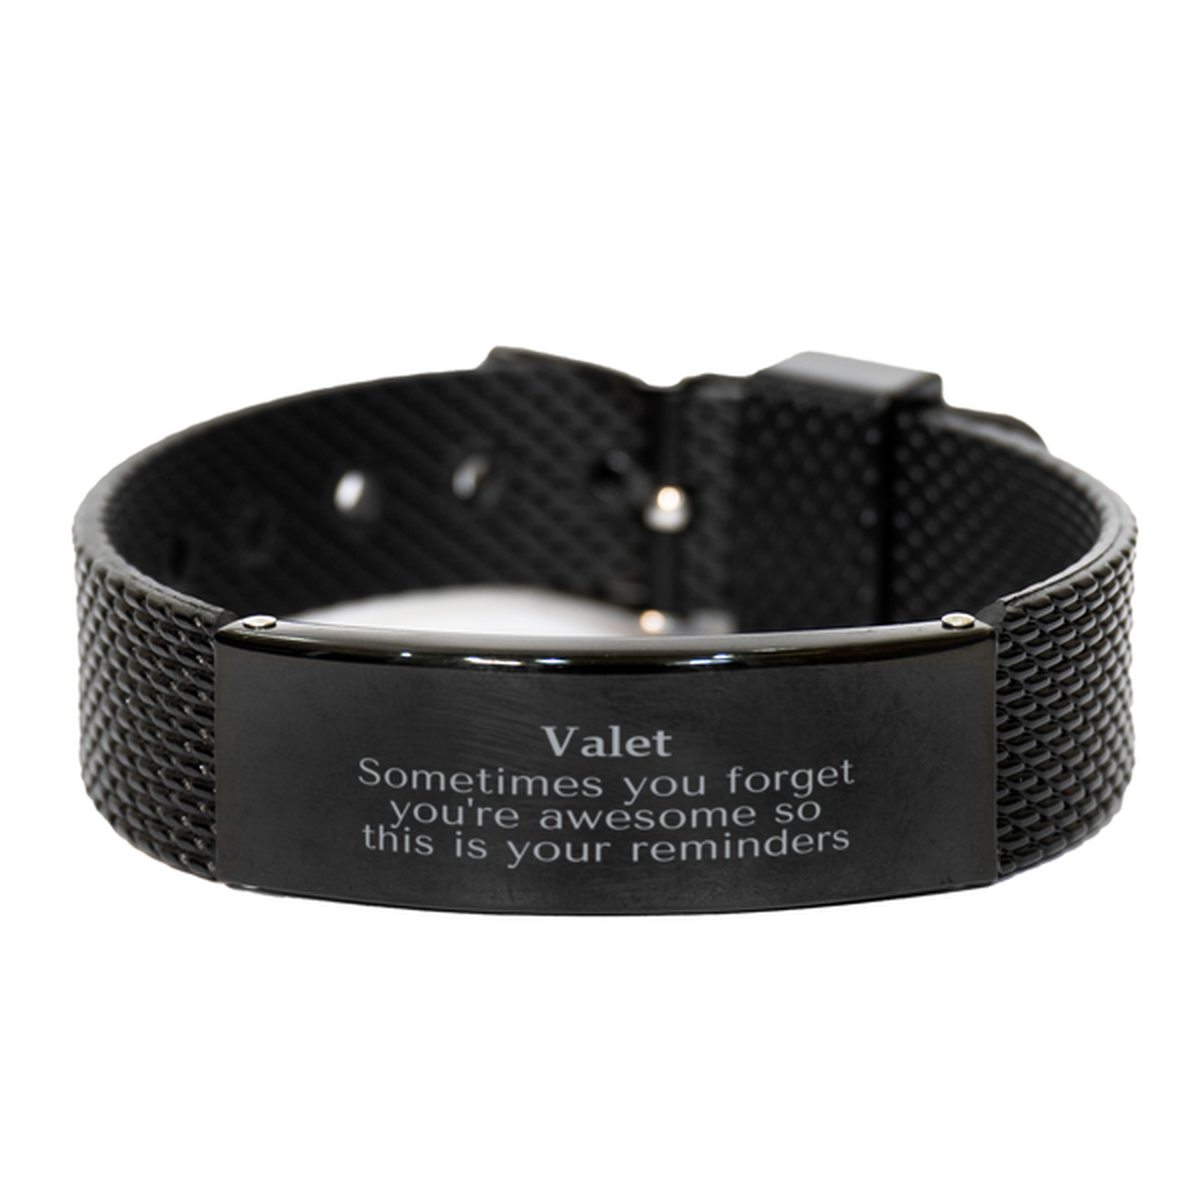 Sentimental Valet Black Shark Mesh Bracelet, Valet Sometimes you forget you're awesome so this is your reminders, Graduation Christmas Birthday Gifts for Valet, Men, Women, Coworkers